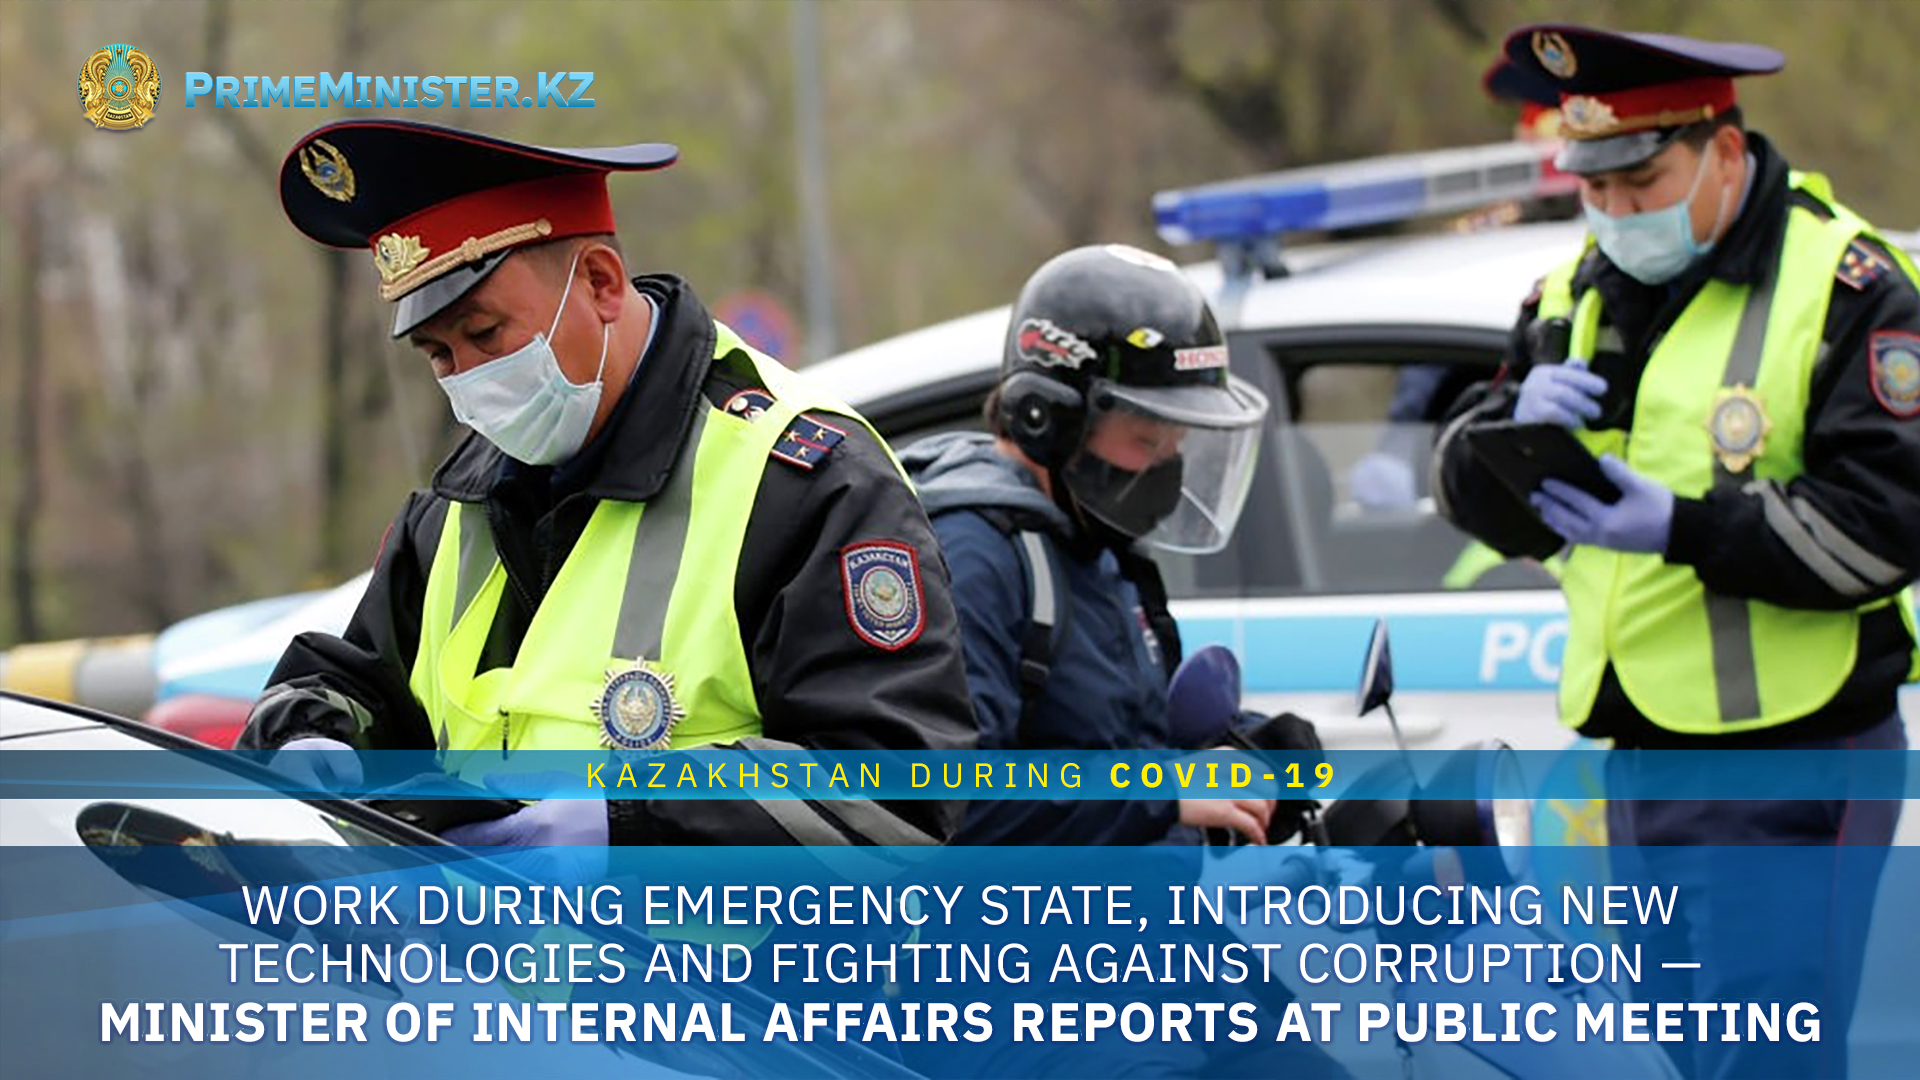 Work during emergency state, introducing new technologies and fighting against corruption